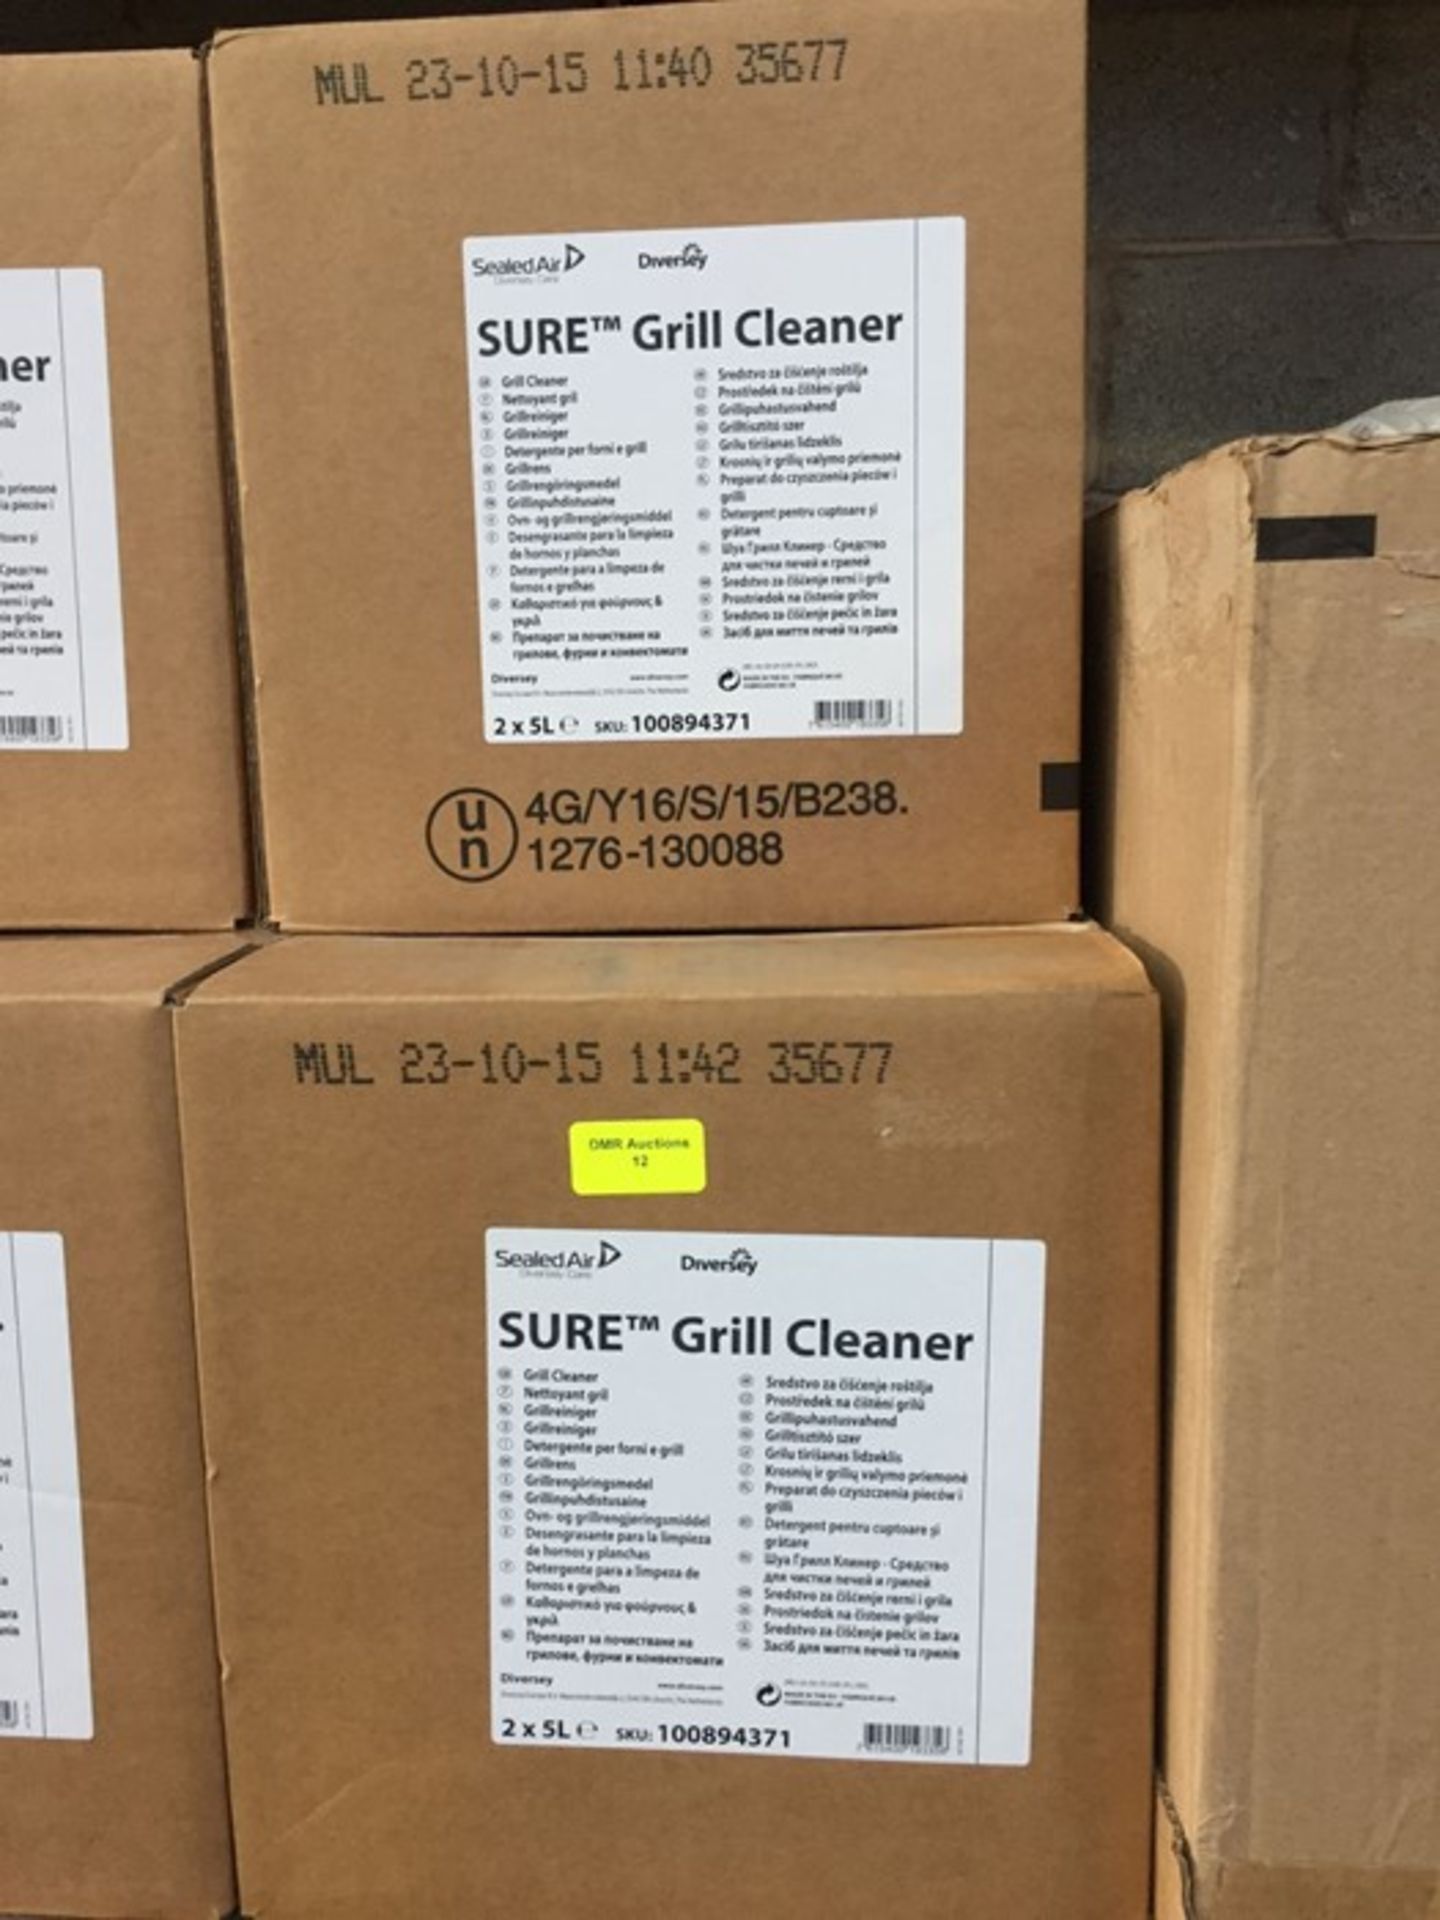 1 LOT TO CONTAIN 3 X BOXES OF SURE GRILL CLEANER - 2 X5L BOTTLES PER BOX